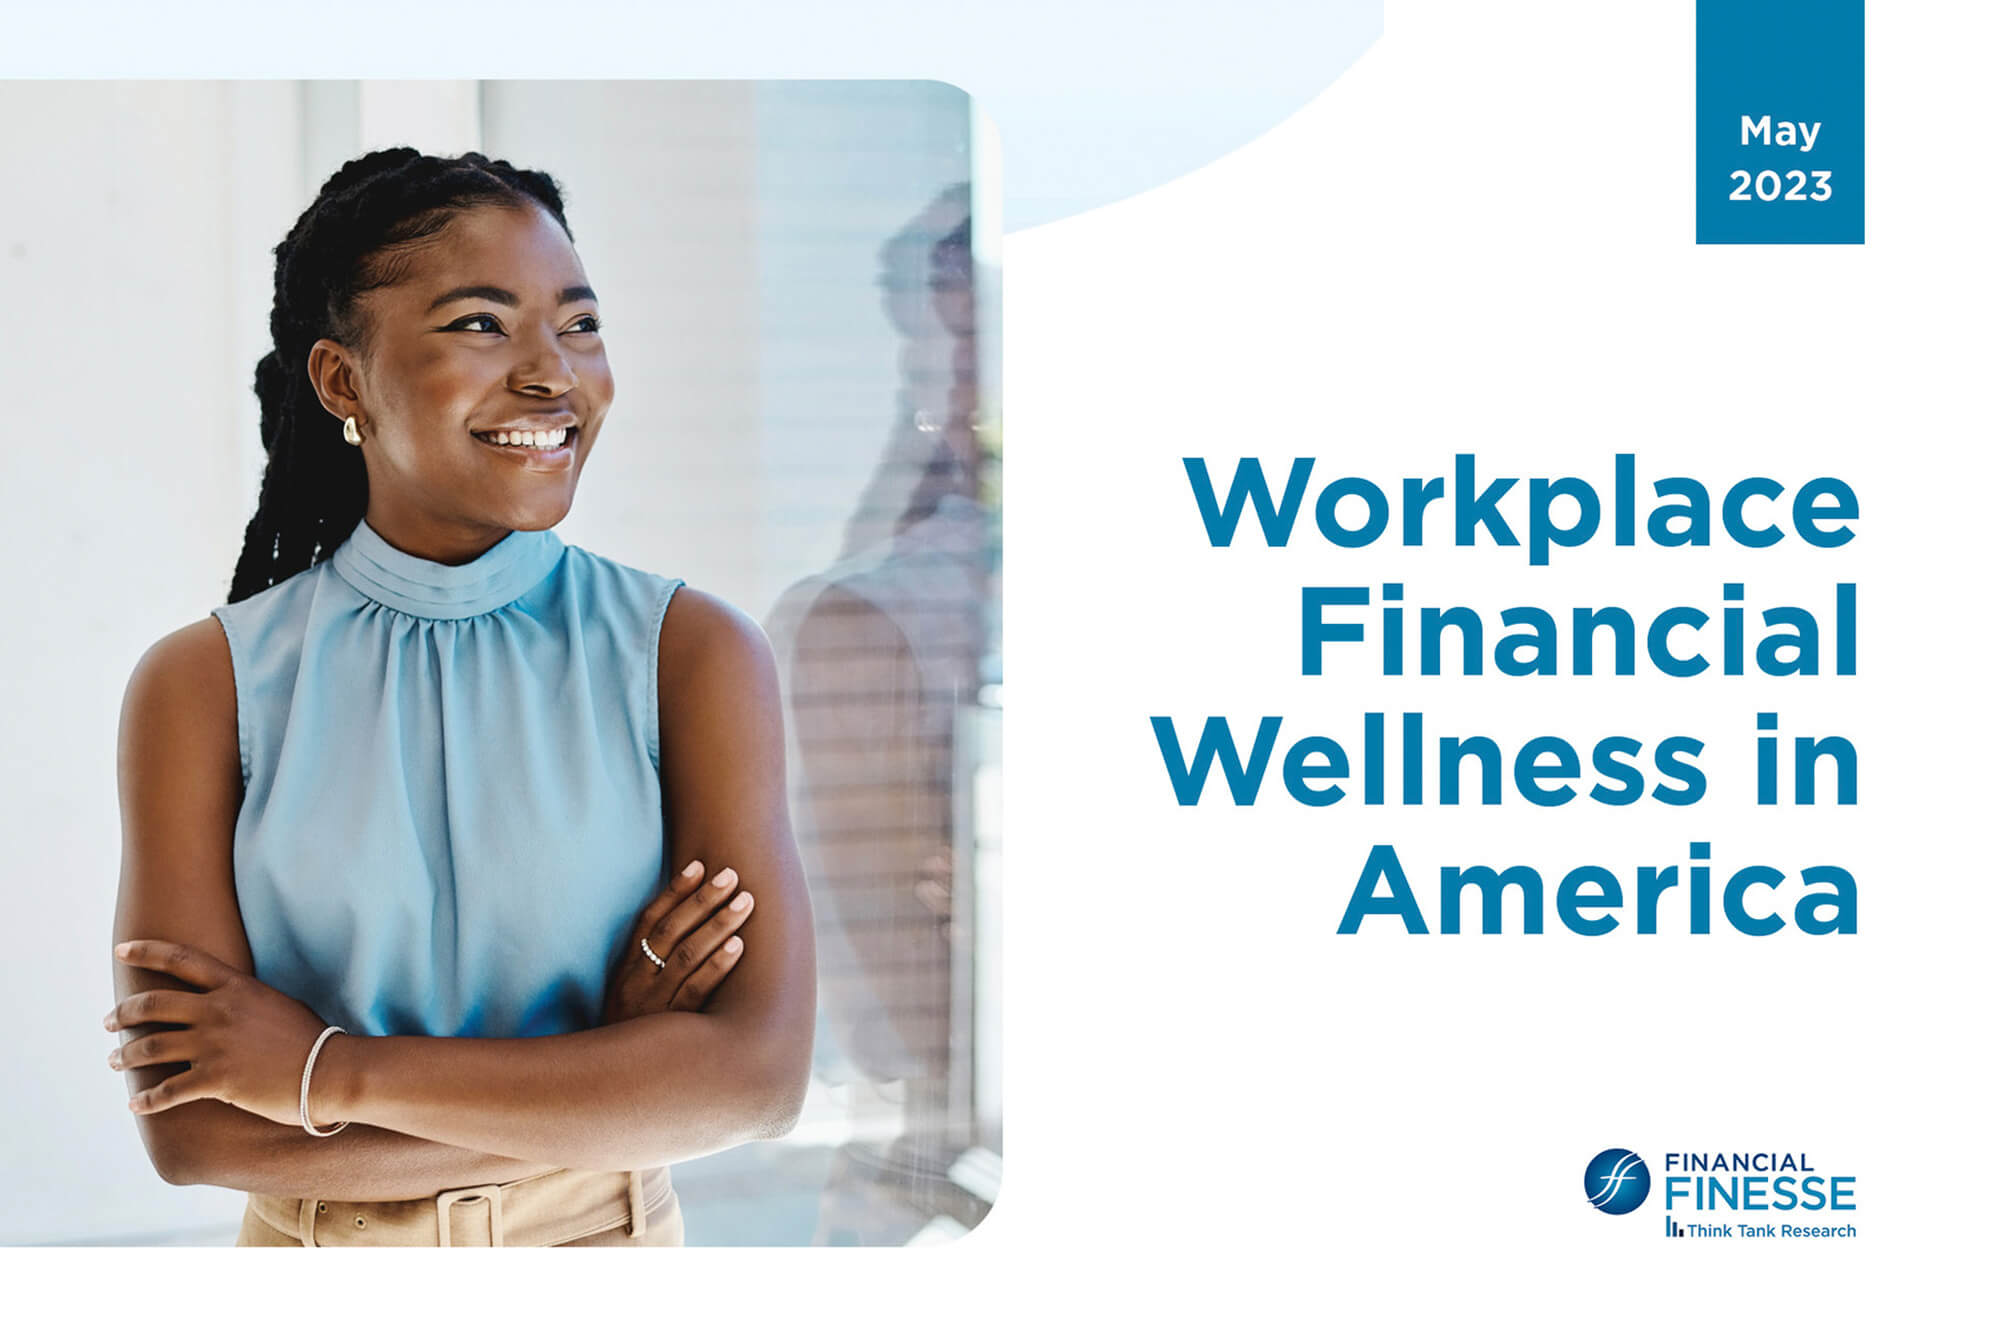 Workplace Financial Wellness in America: A Year in Review